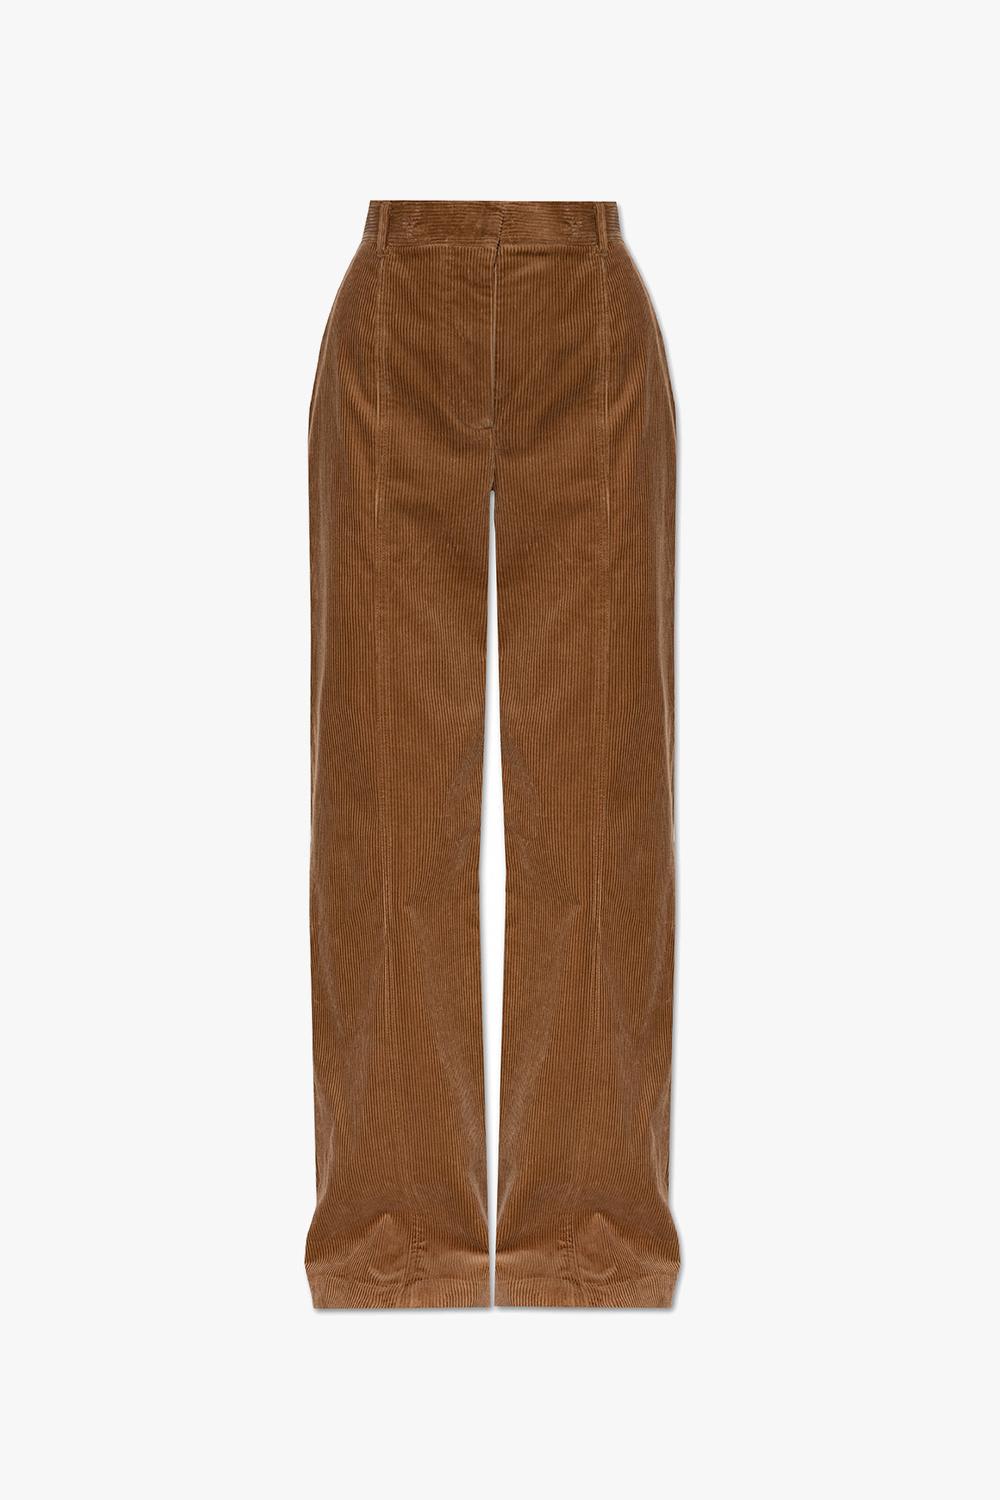 Burberry blakely Corduroy Trousers